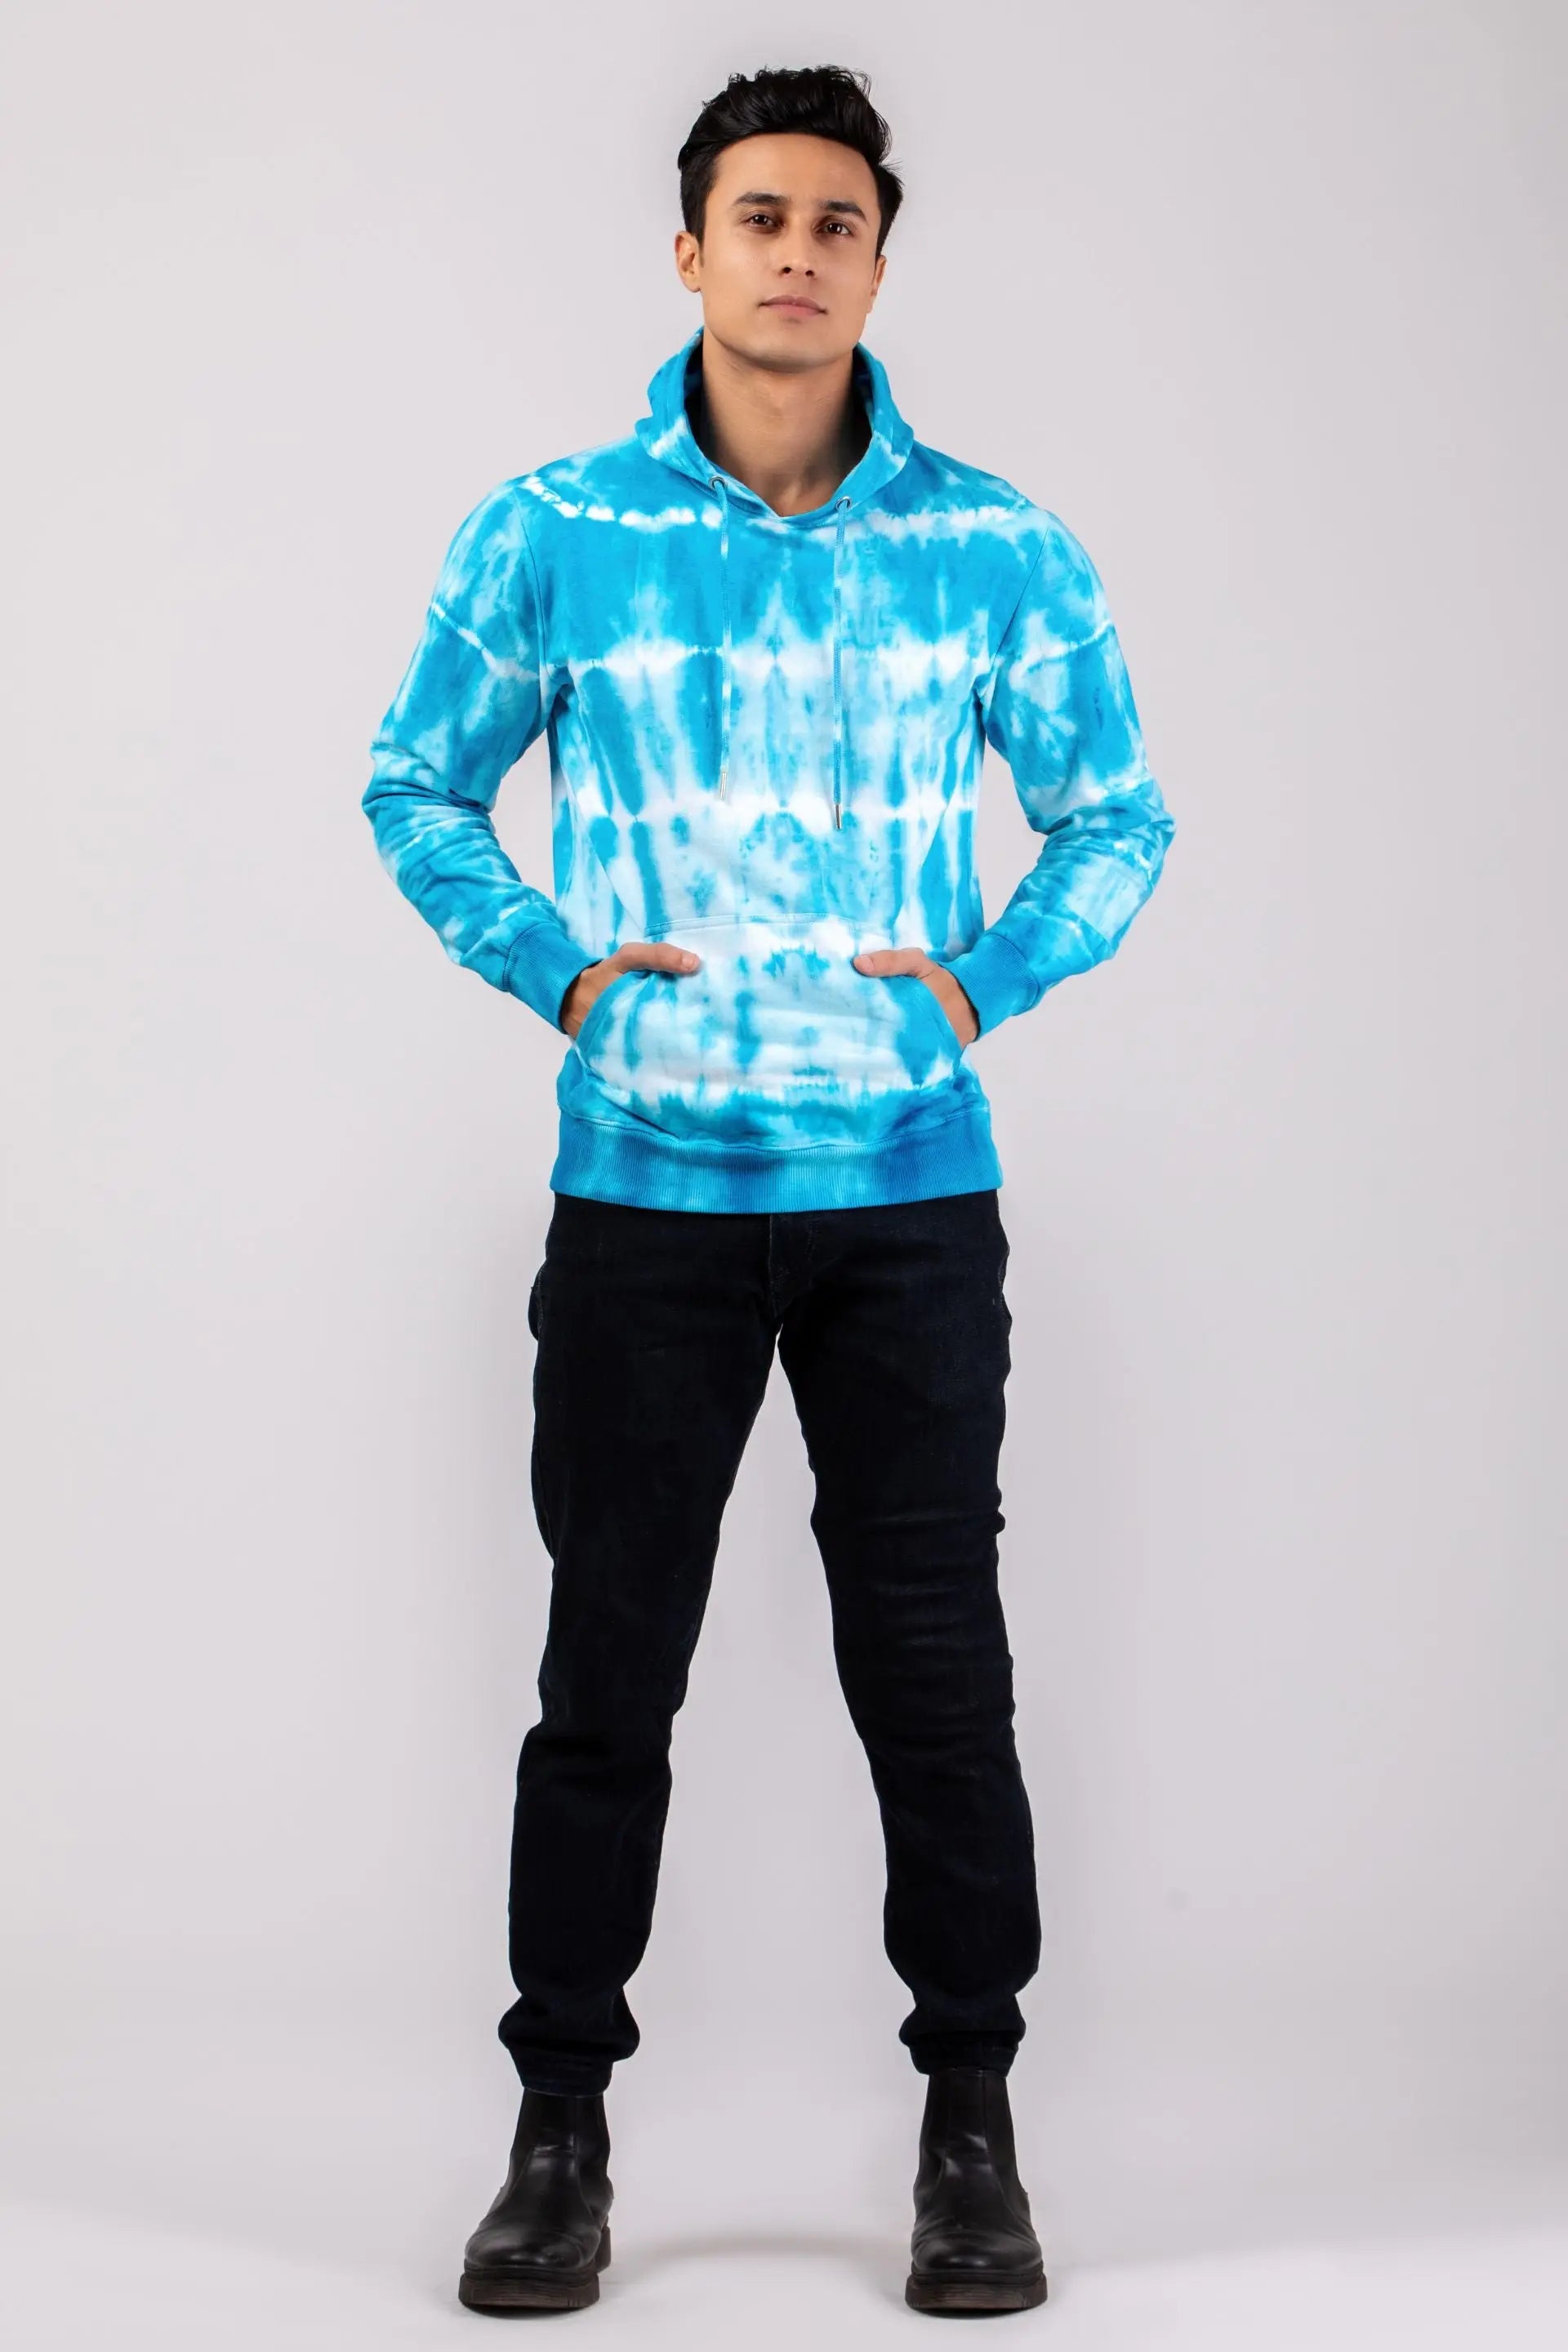 Firangi Yarn Super Soft Cotton Tie&Dye Blue and White Ombre Hoodie With Kangaroo Pockets